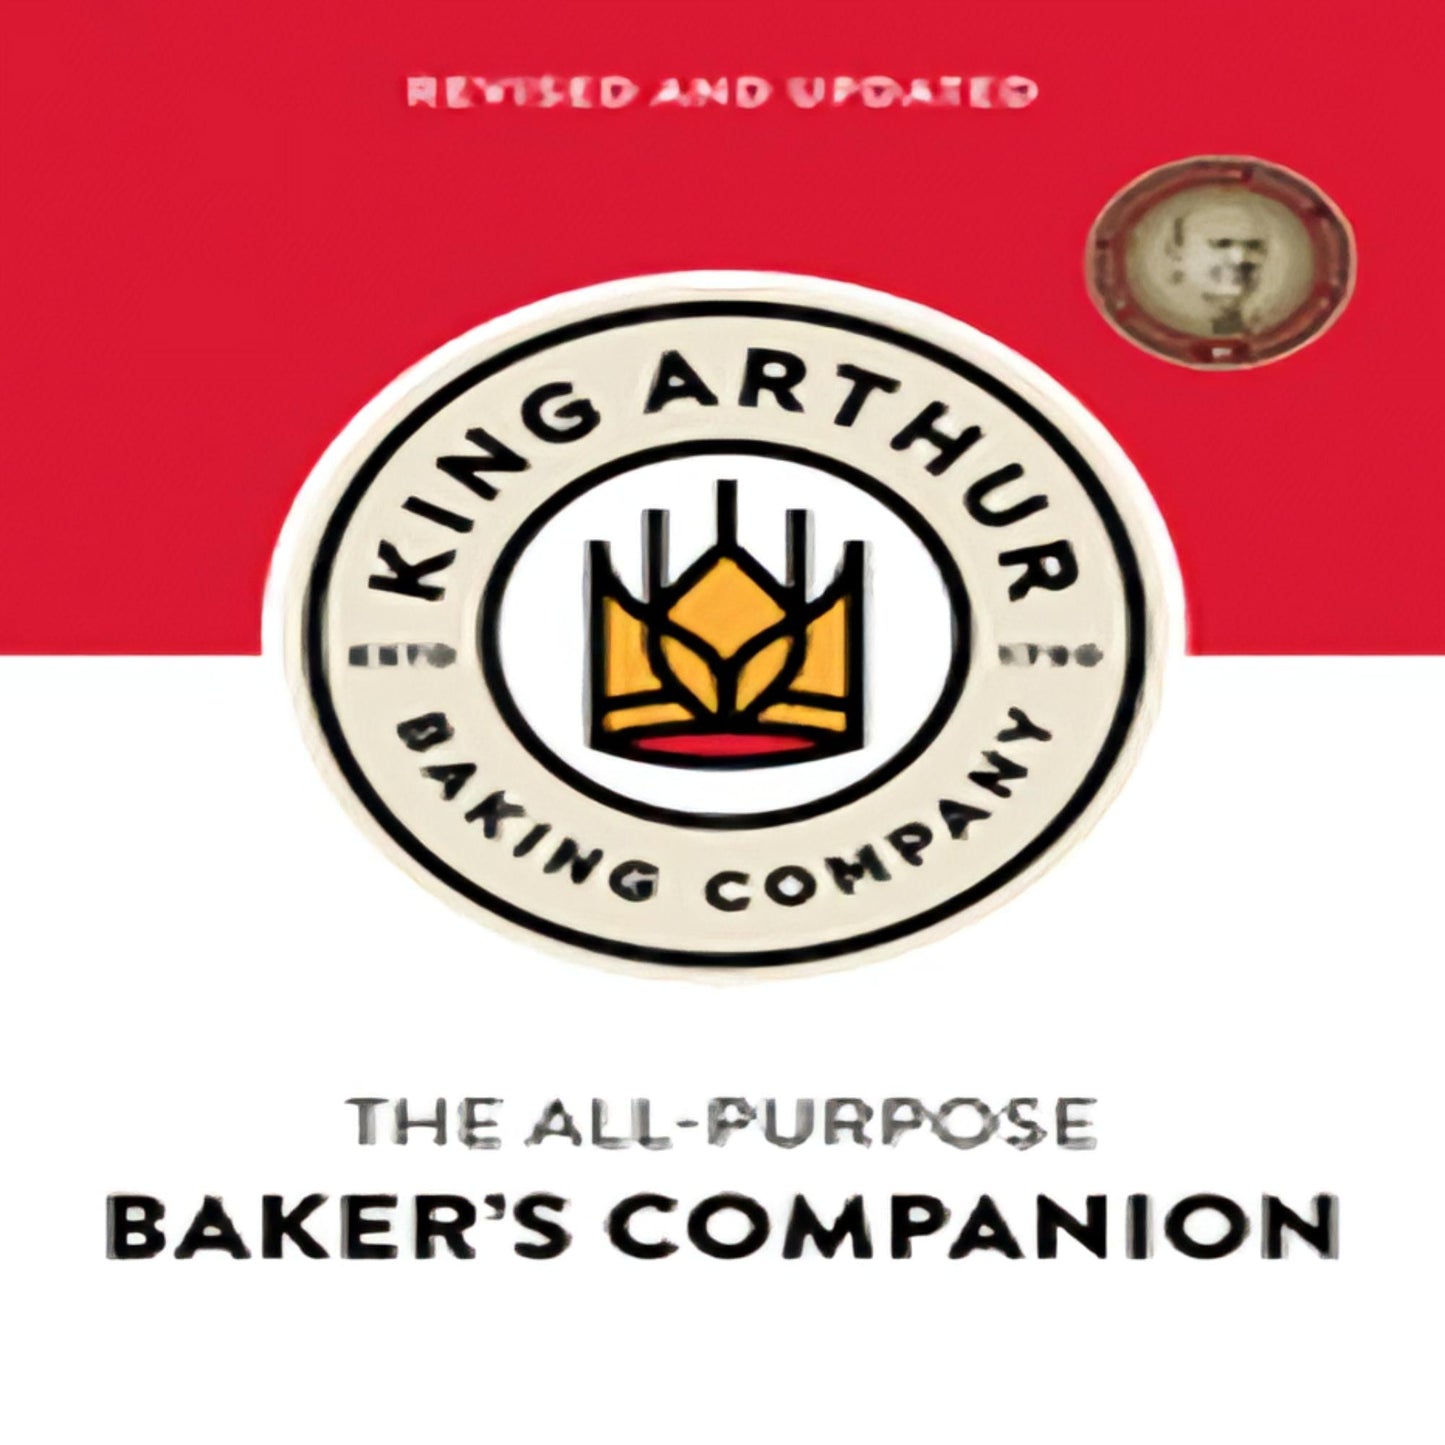 TEXTBOOK The King Arthur Baking Company's All-Purpose Baker's Companion (Revised and Updated)179-022823-1682686175DPGBOOKSTORE.COM. Today's Bestsellers.